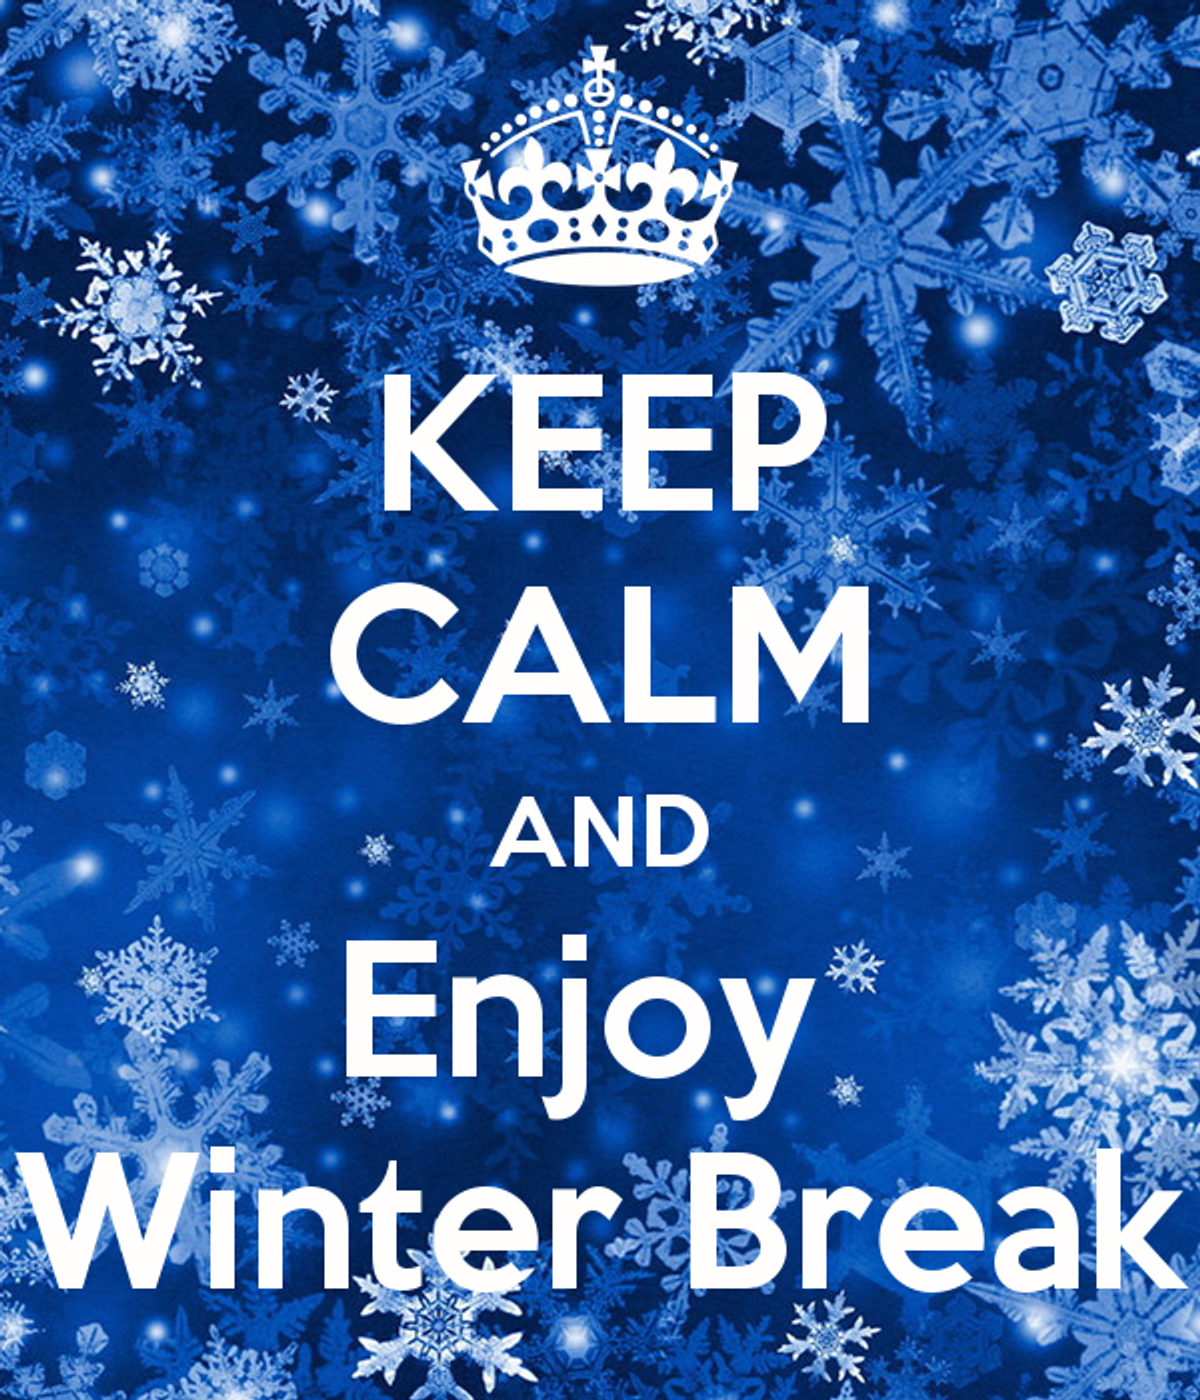 10 Things Students Should/Could Do Over Winter Break